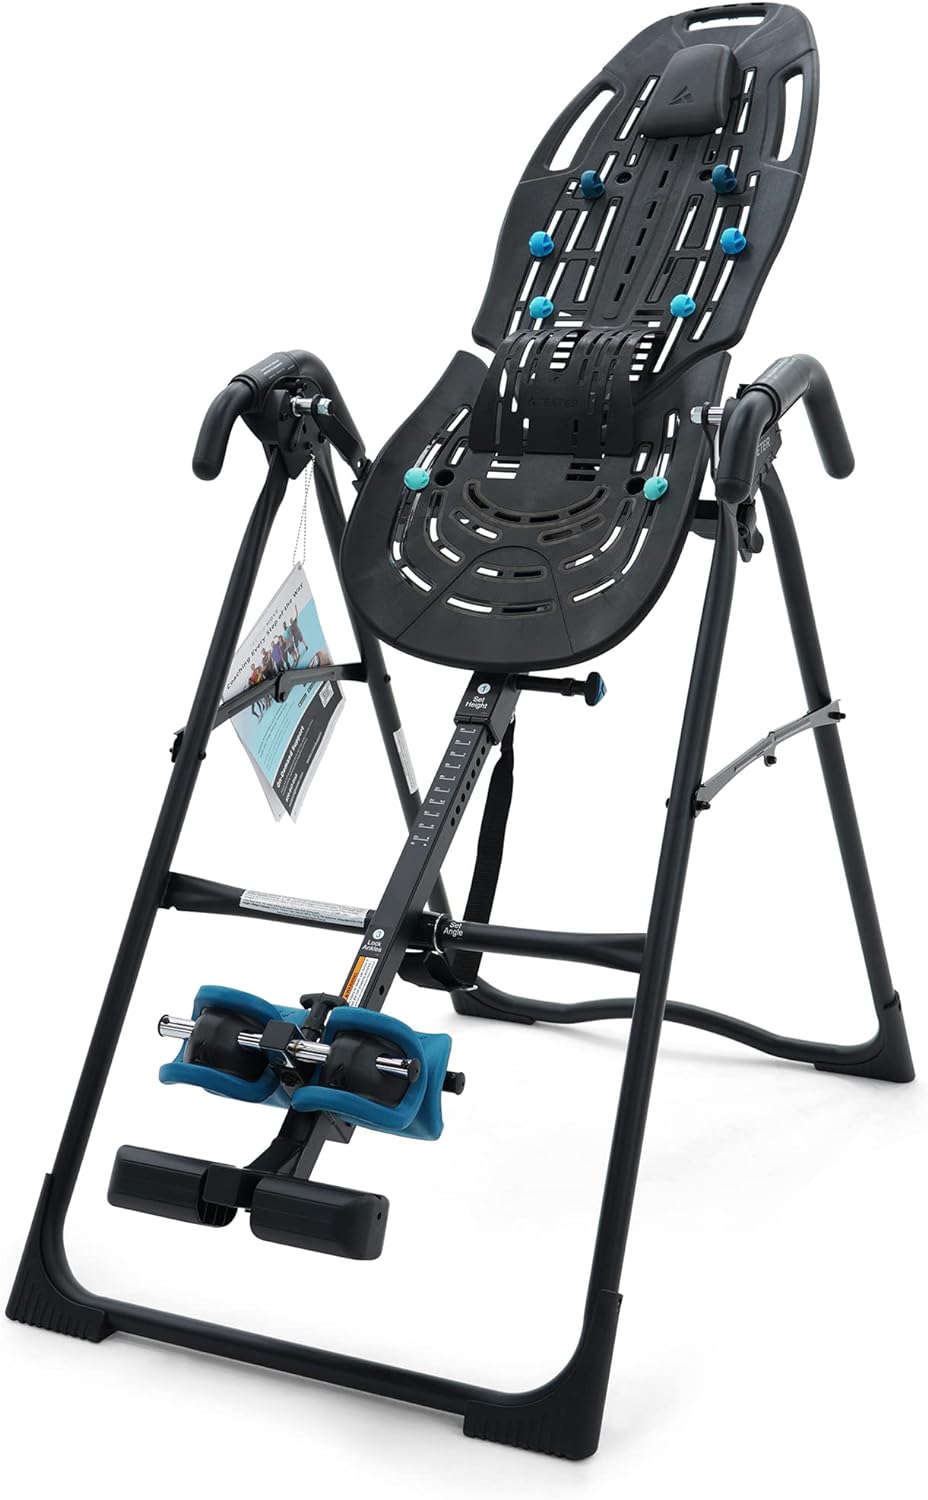 Teeter EP-560 Ltd. Inversion Table for Back Pain, FDA-Registered, UL Safety-Certified